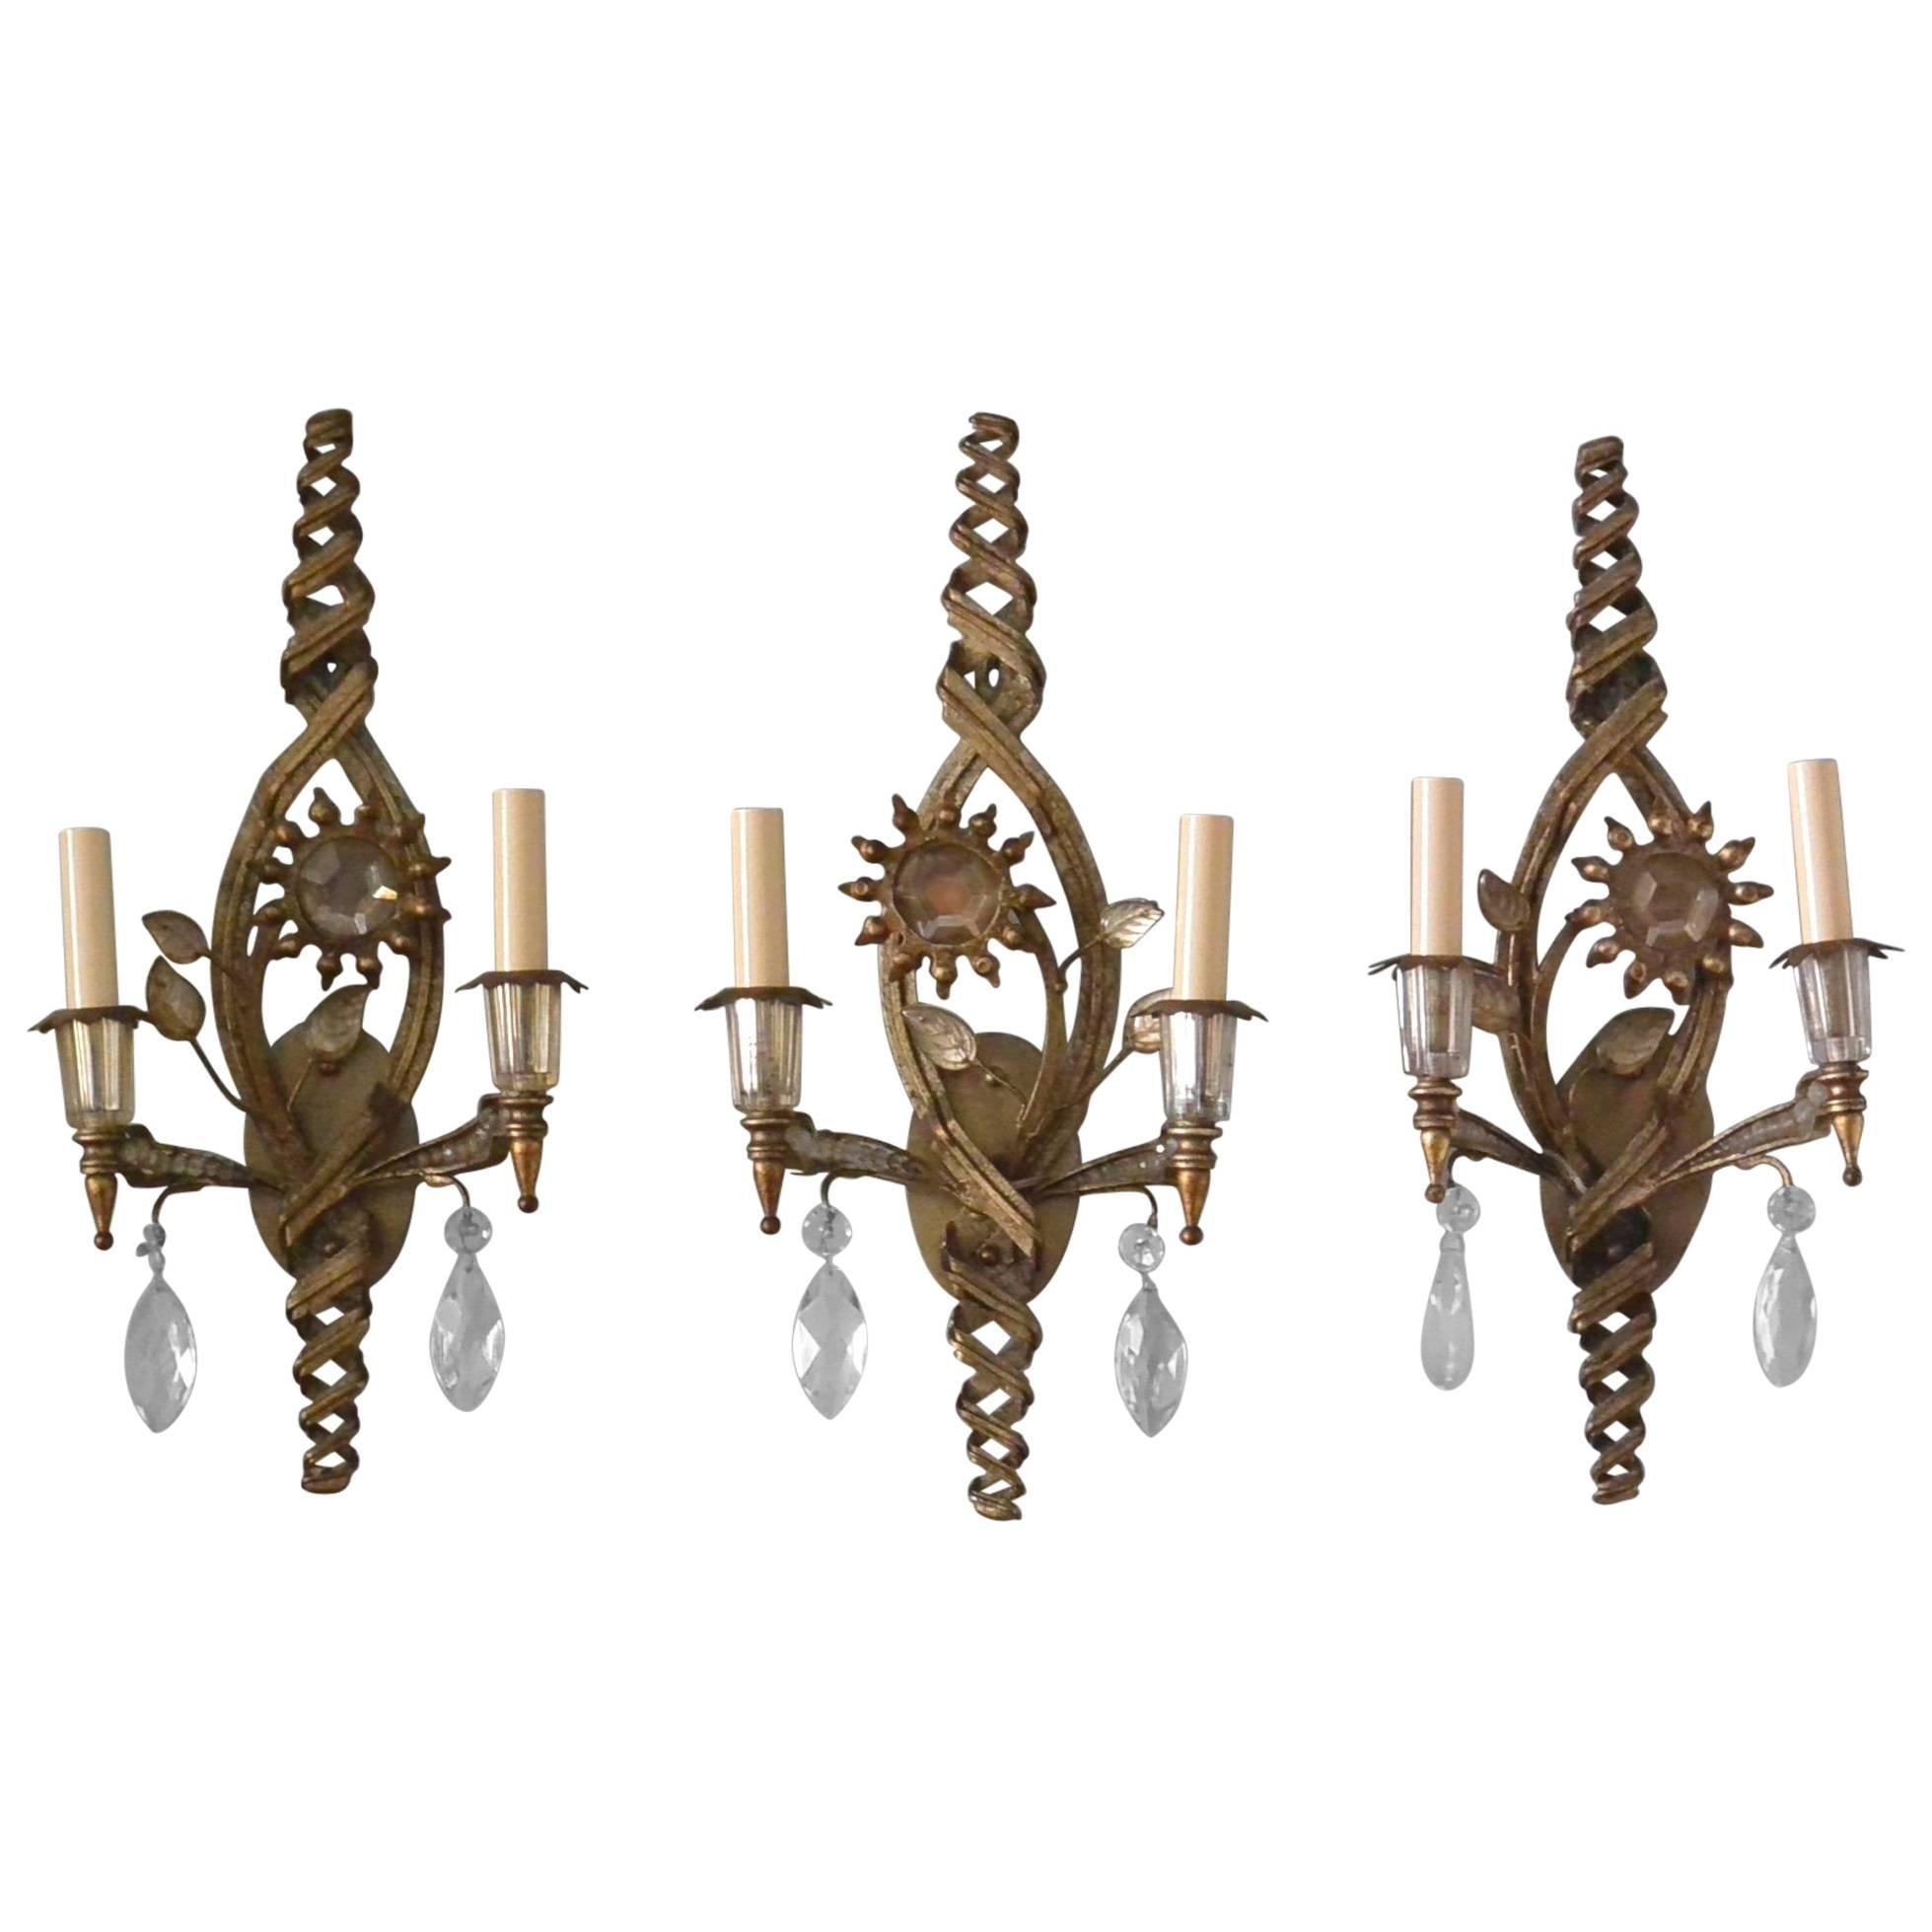 Set of Three Vintage Italian Mirrored Glass Sconces For Sale